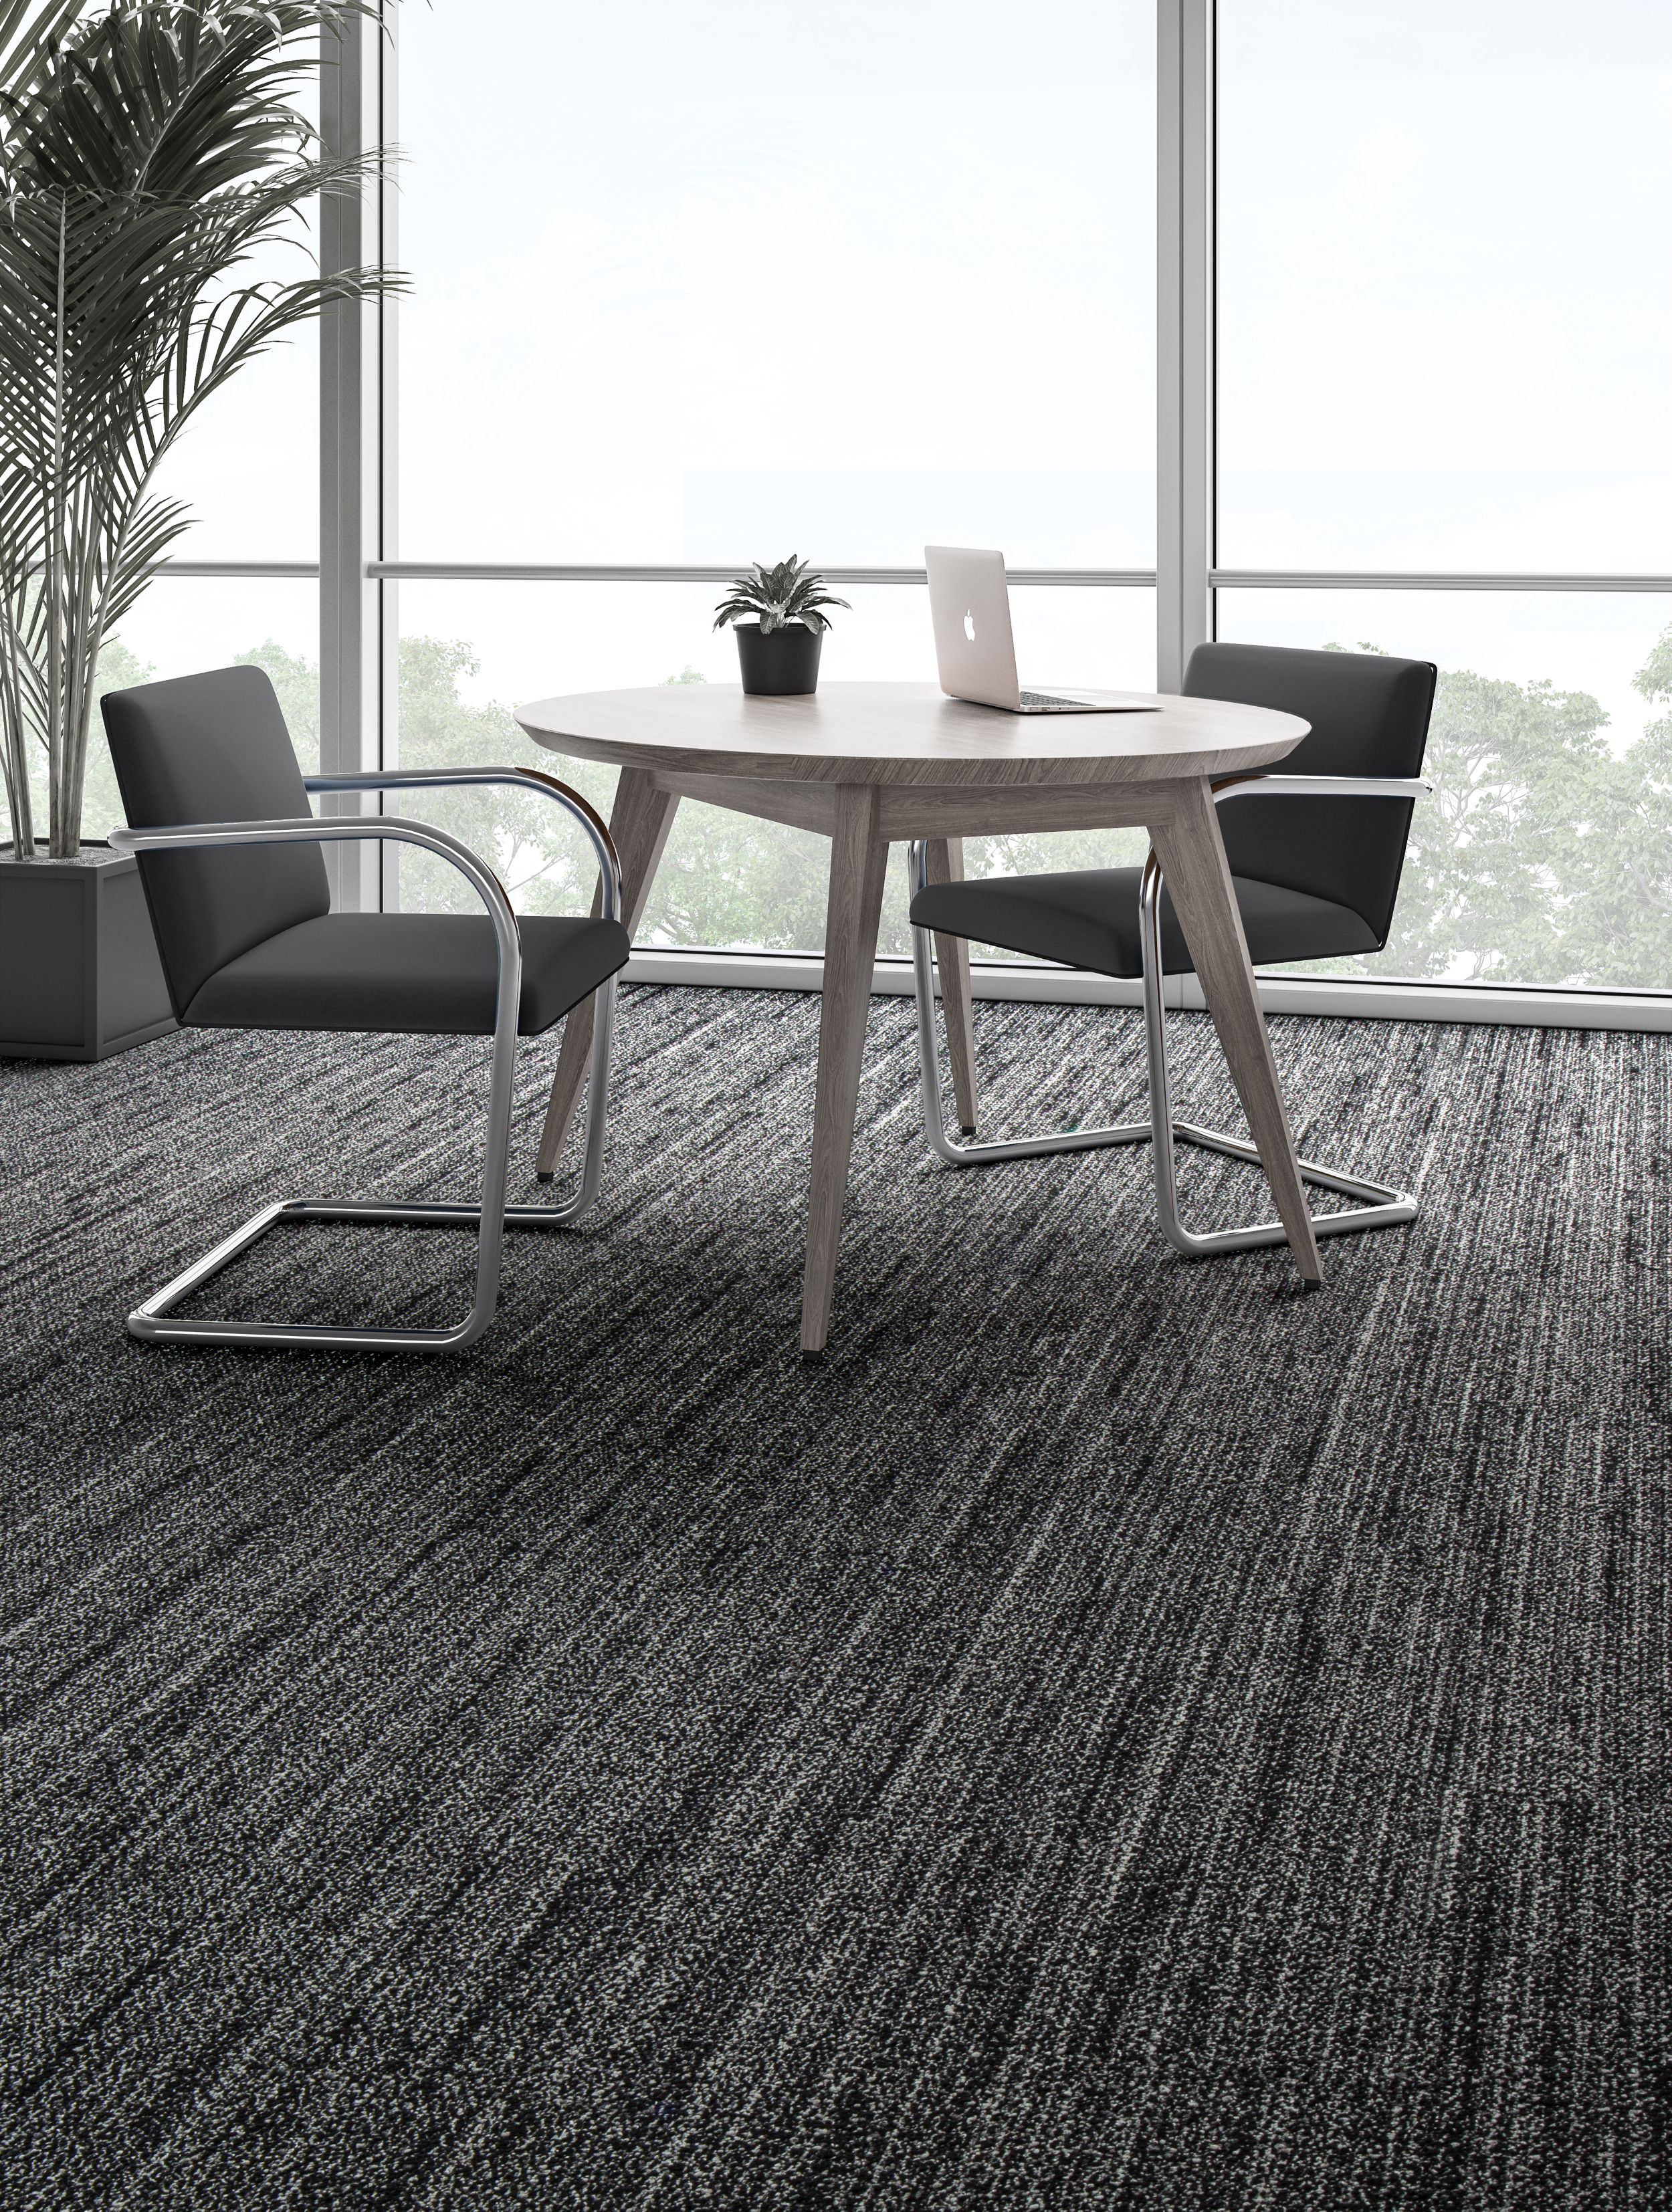 Interface WW870 plank carpet tile shown with small table and chairs Bildnummer 8